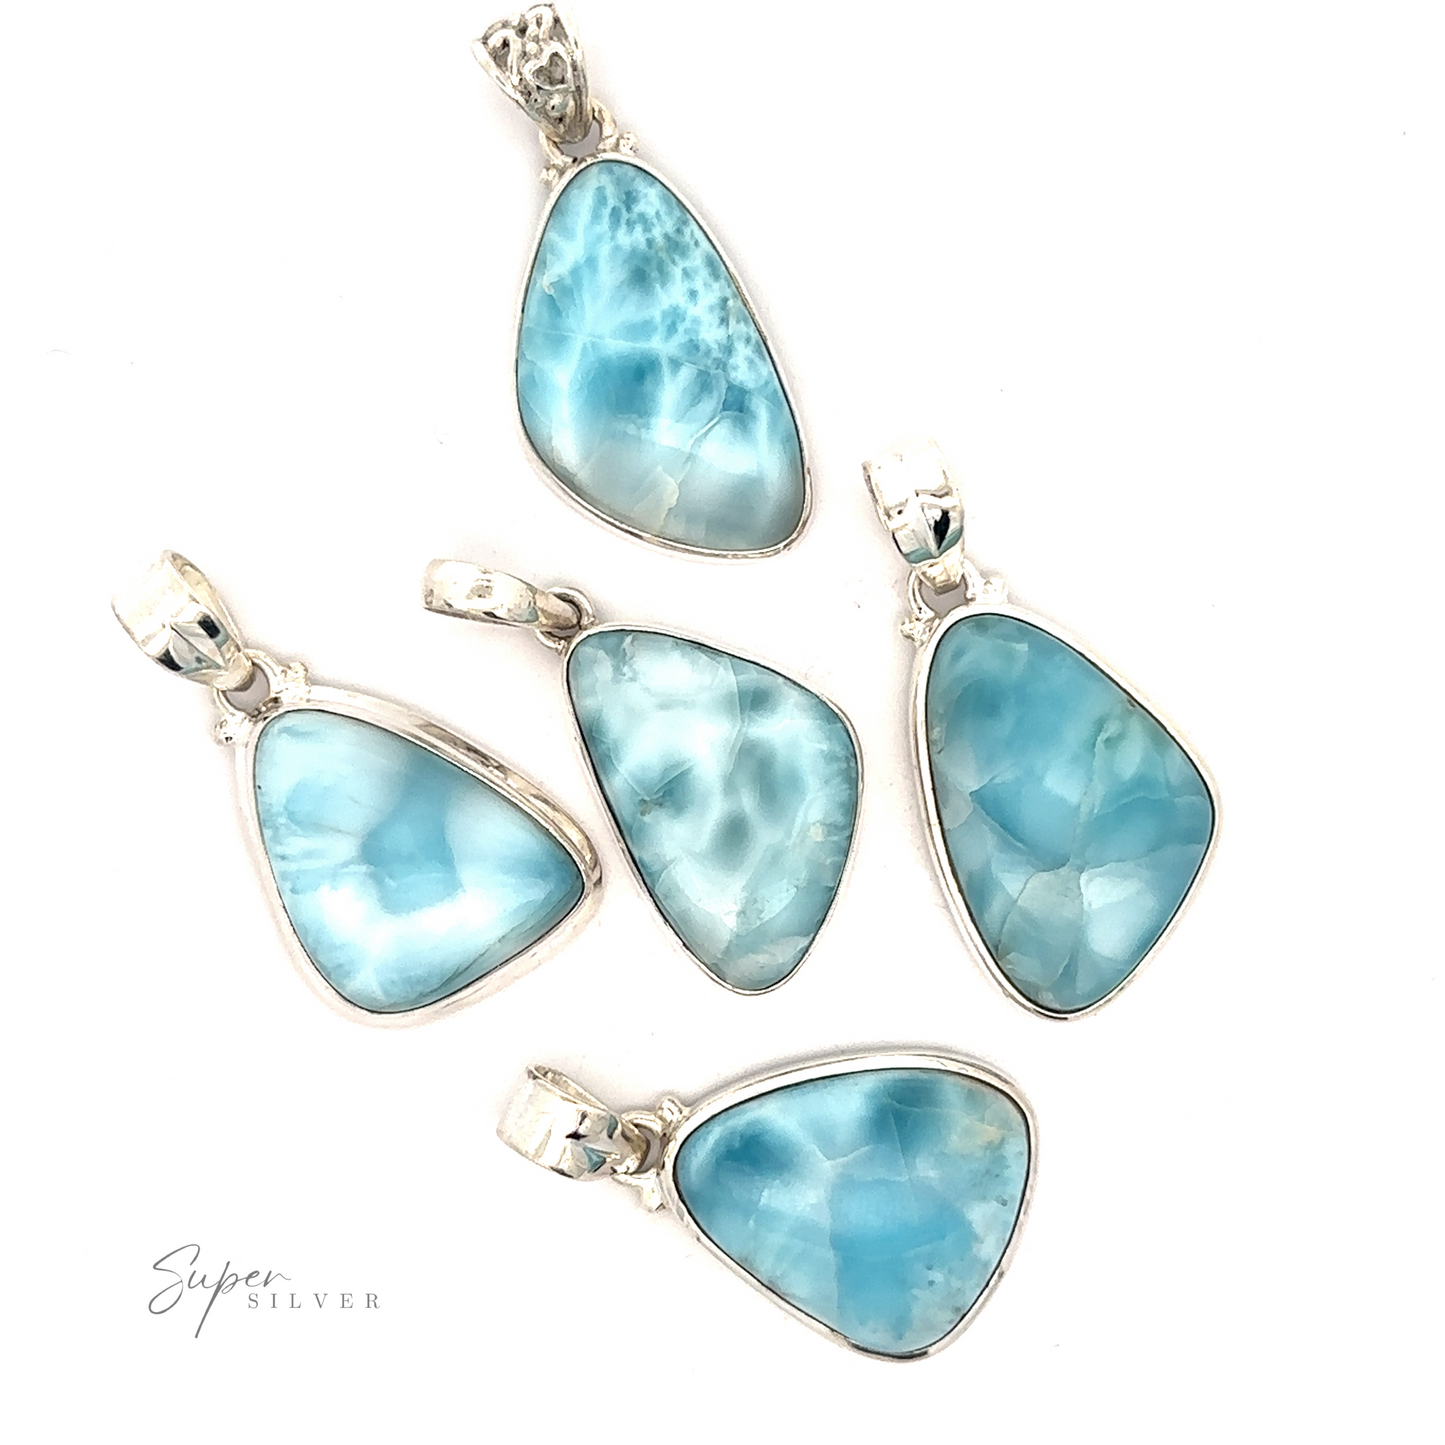 
                  
                    Five Freeform Shape Larimar Pendants with sterling silver settings are arranged on a white background. A "Super Silver" label is displayed in the bottom left corner. Chain not included.
                  
                